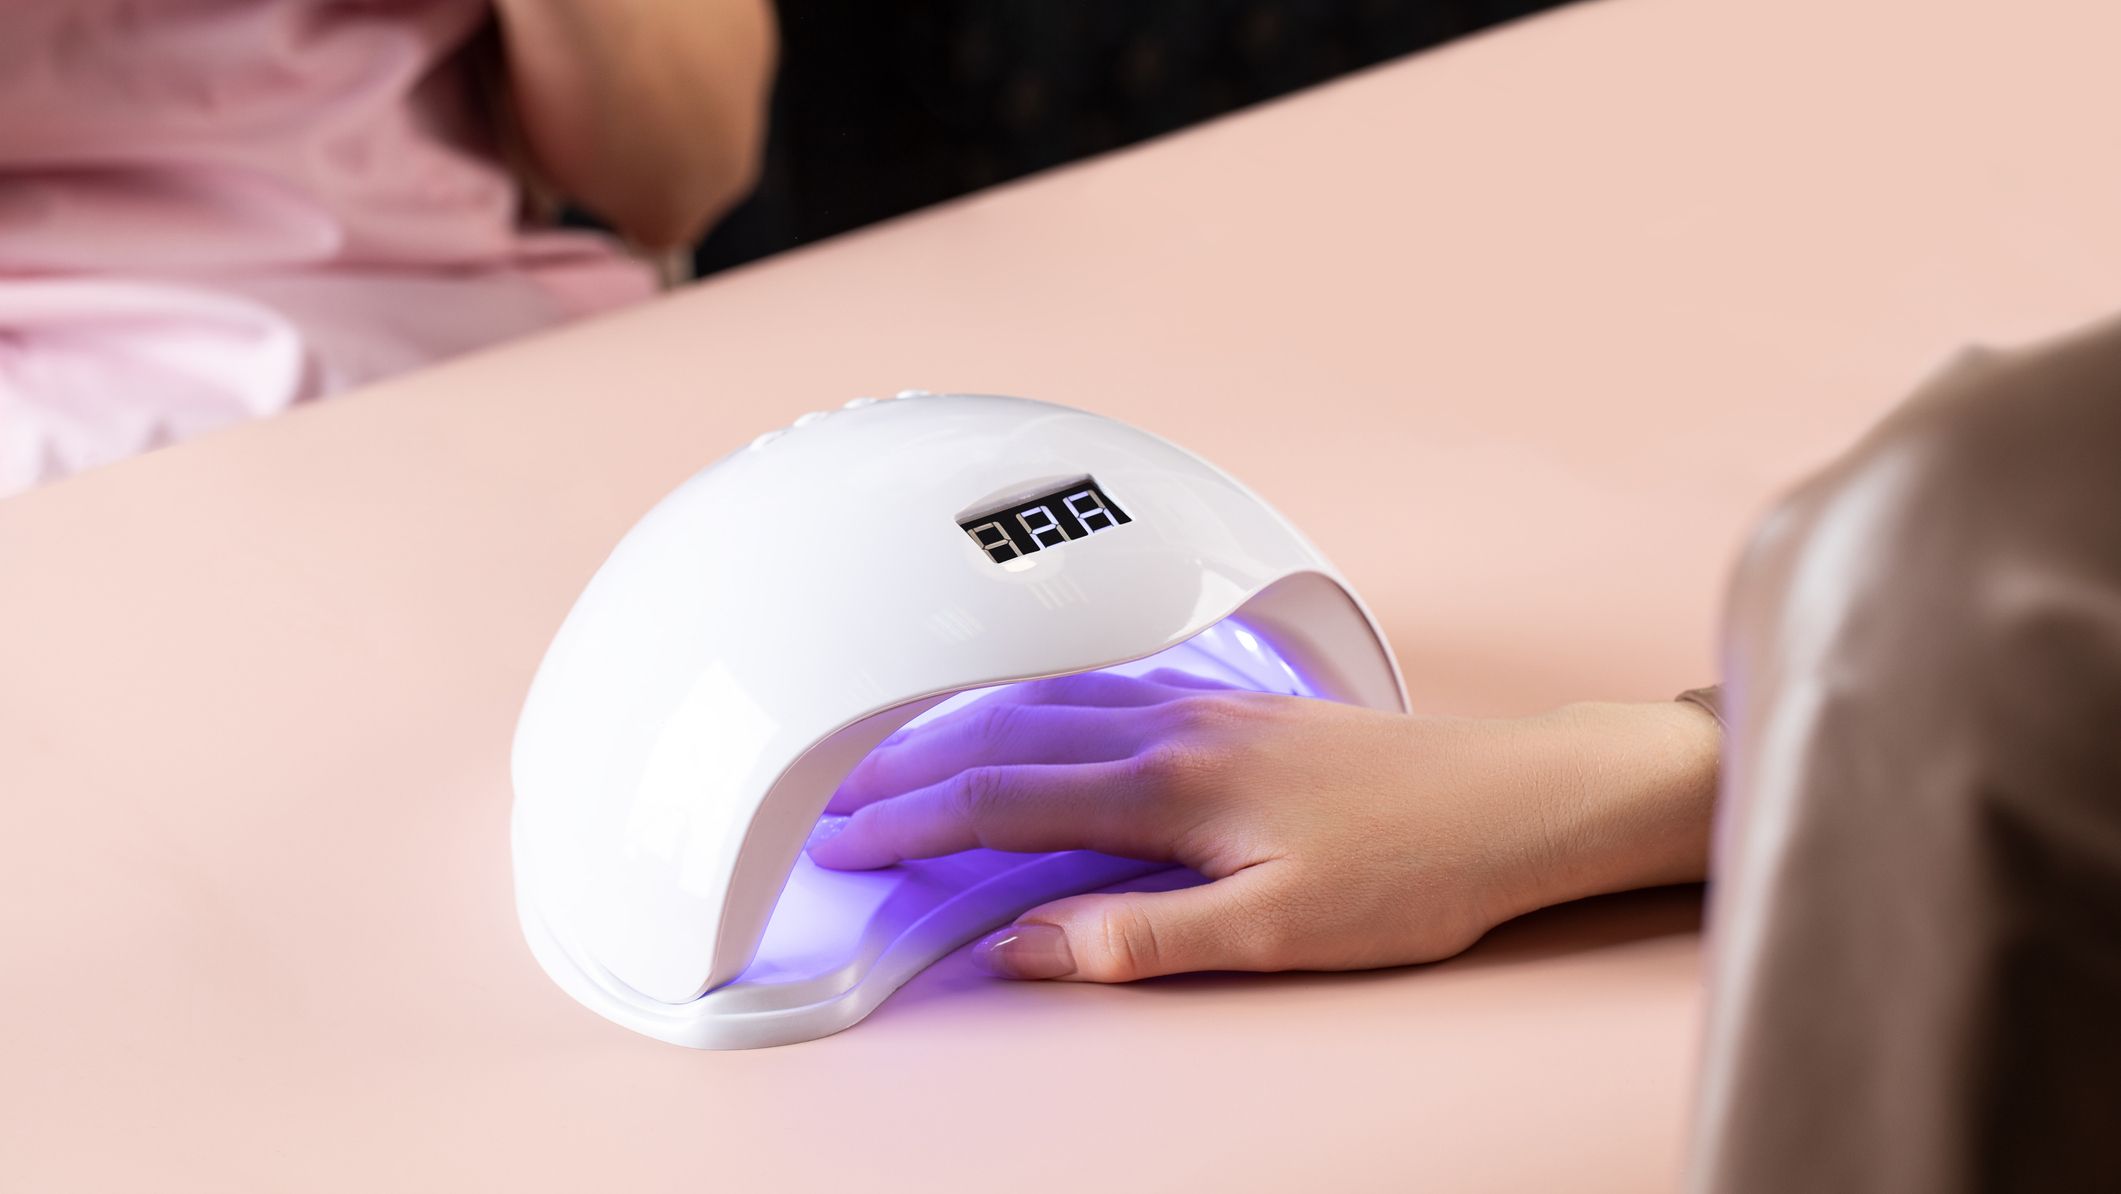 UV nail lamps can damage DNA and cause mutations, new study finds